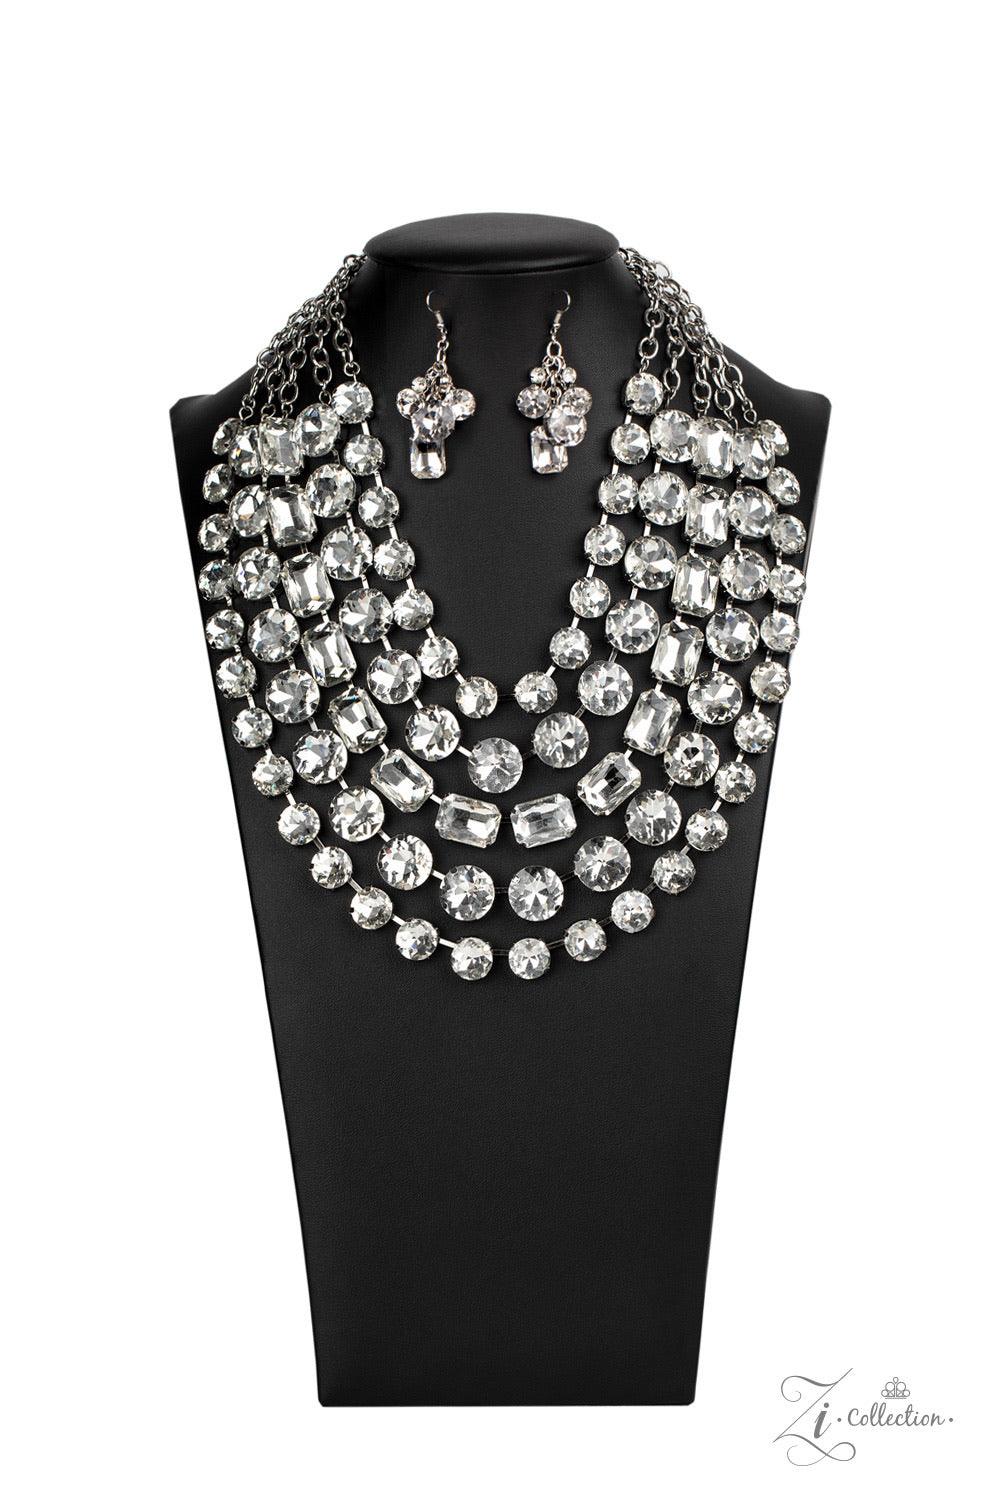 Paparazzi Accessories Irresistible 💗💗ZiCollection $25💗💗 Featuring round and emerald style cuts, row after row of dramatically oversized white rhinestones delicately link into blinding layers below the collar. Featuring sleek silver fittings, each rhin